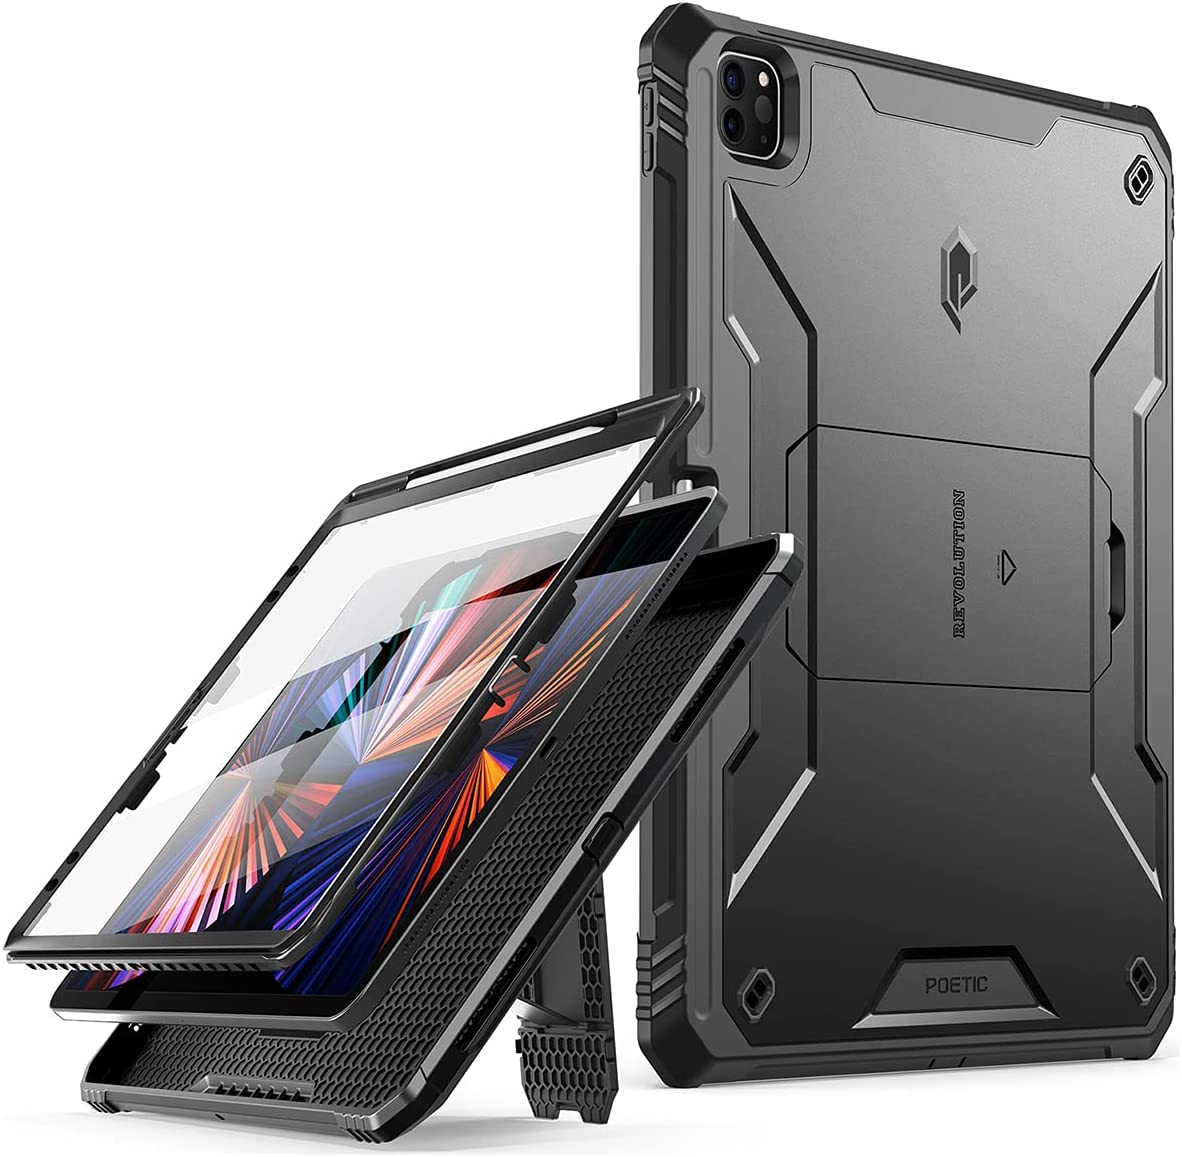 Poetic Revolution Case Designed for iPad Air 5 / iPad Air 4 10.9 inch,  Full-Body Rugged Shockproof Protective Cover with Kickstand and  Built-in-Screen Protector for iPad Air 5th / 4th Gen, Black 